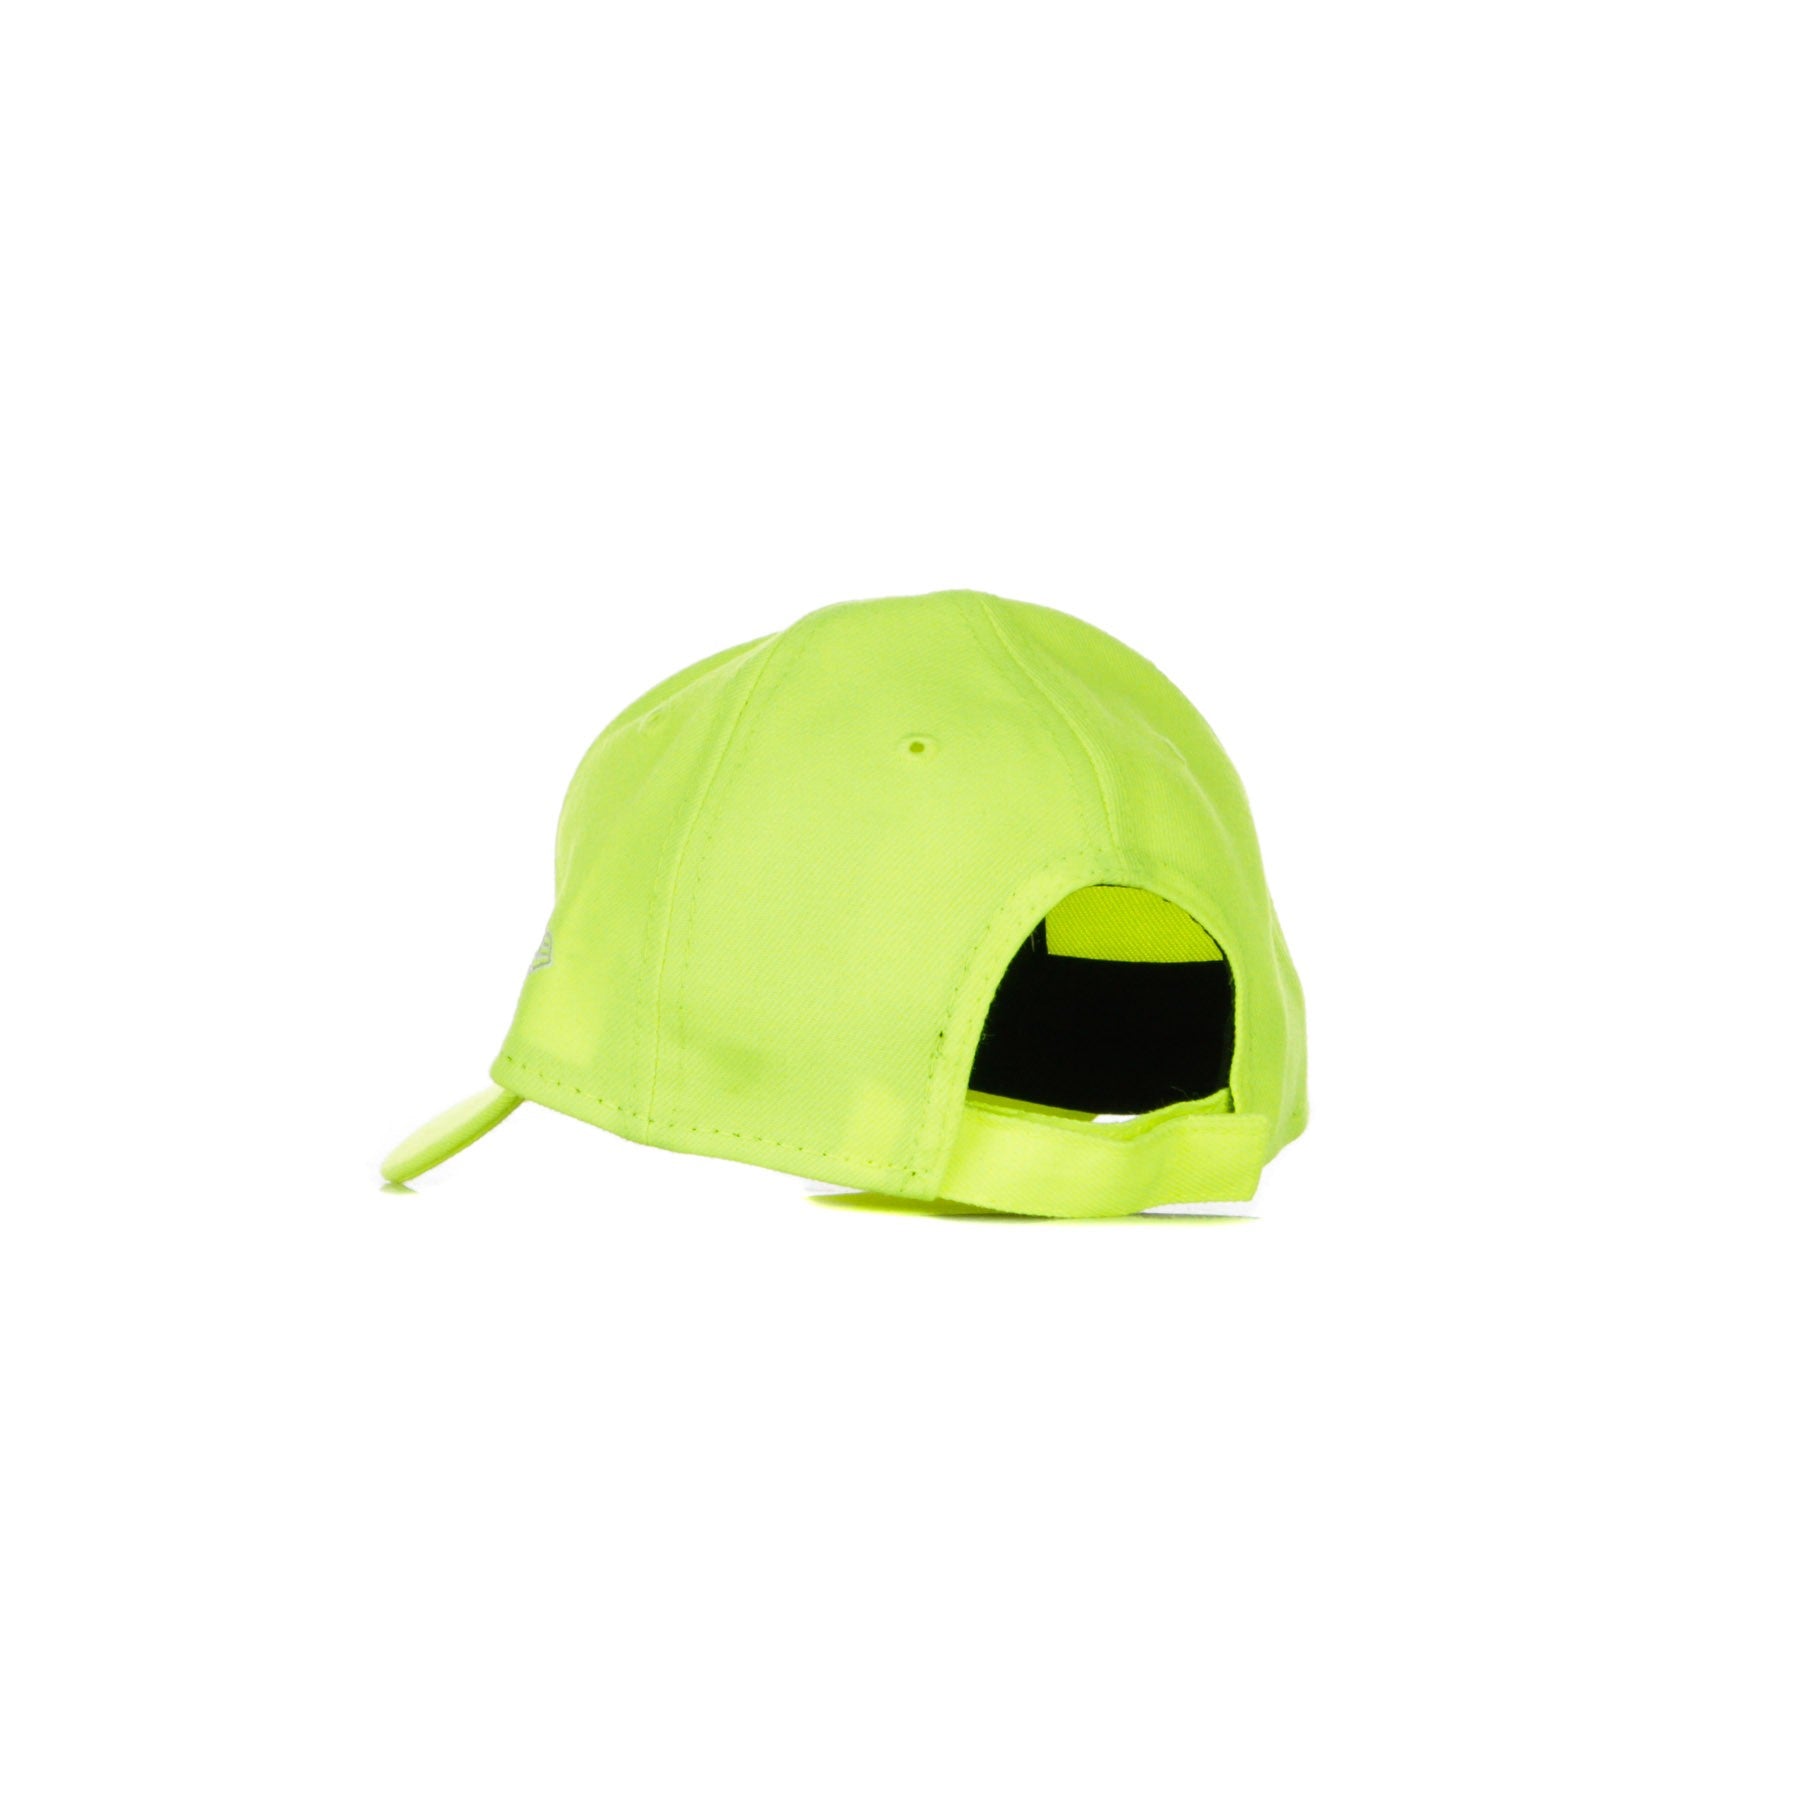 Curved Visor Cap for Children Mlb Kids League Essential Neon Pack Neyyan Neon Yellow/white